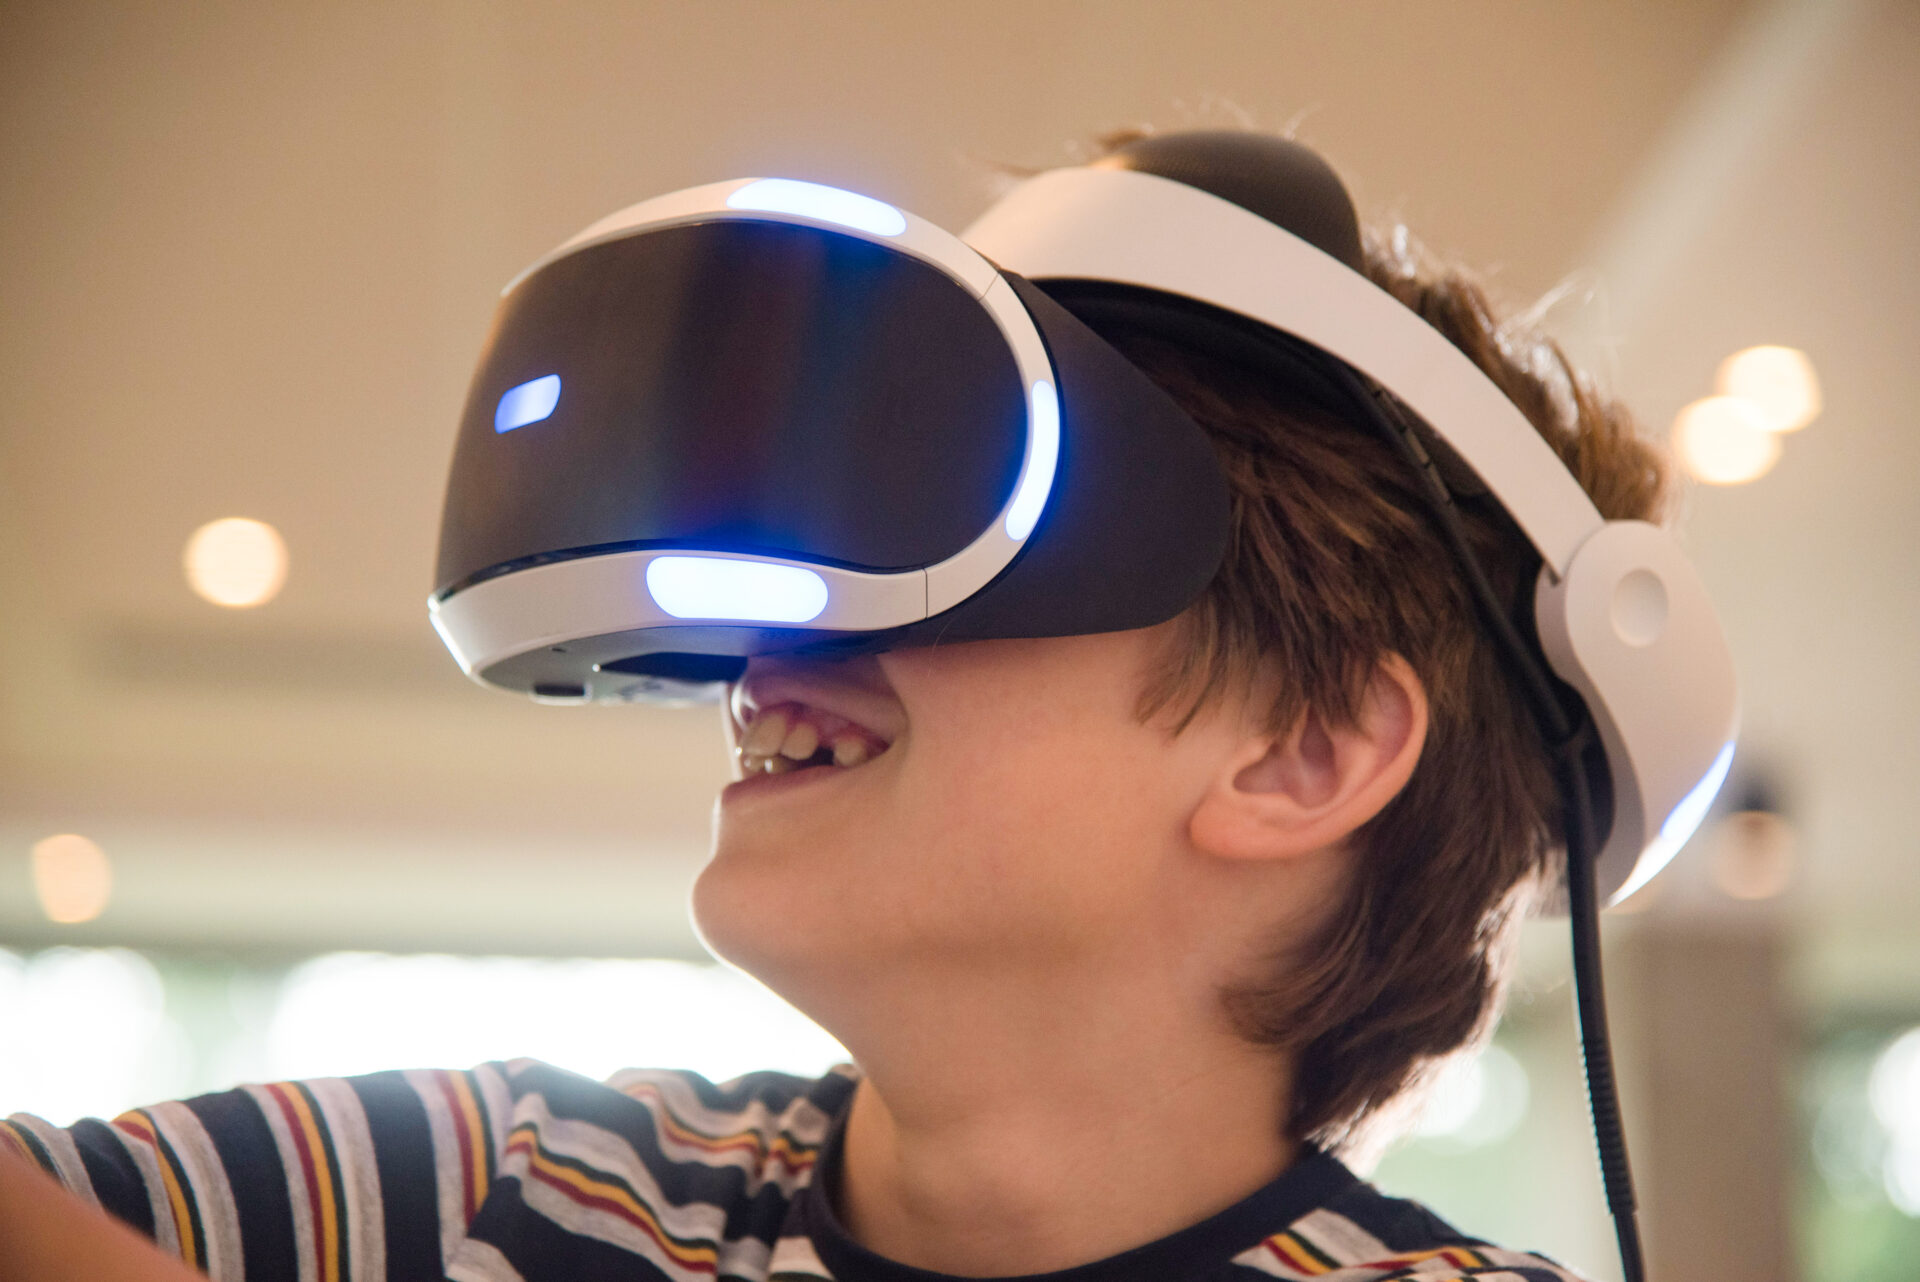 An image of a child playing on VR headset